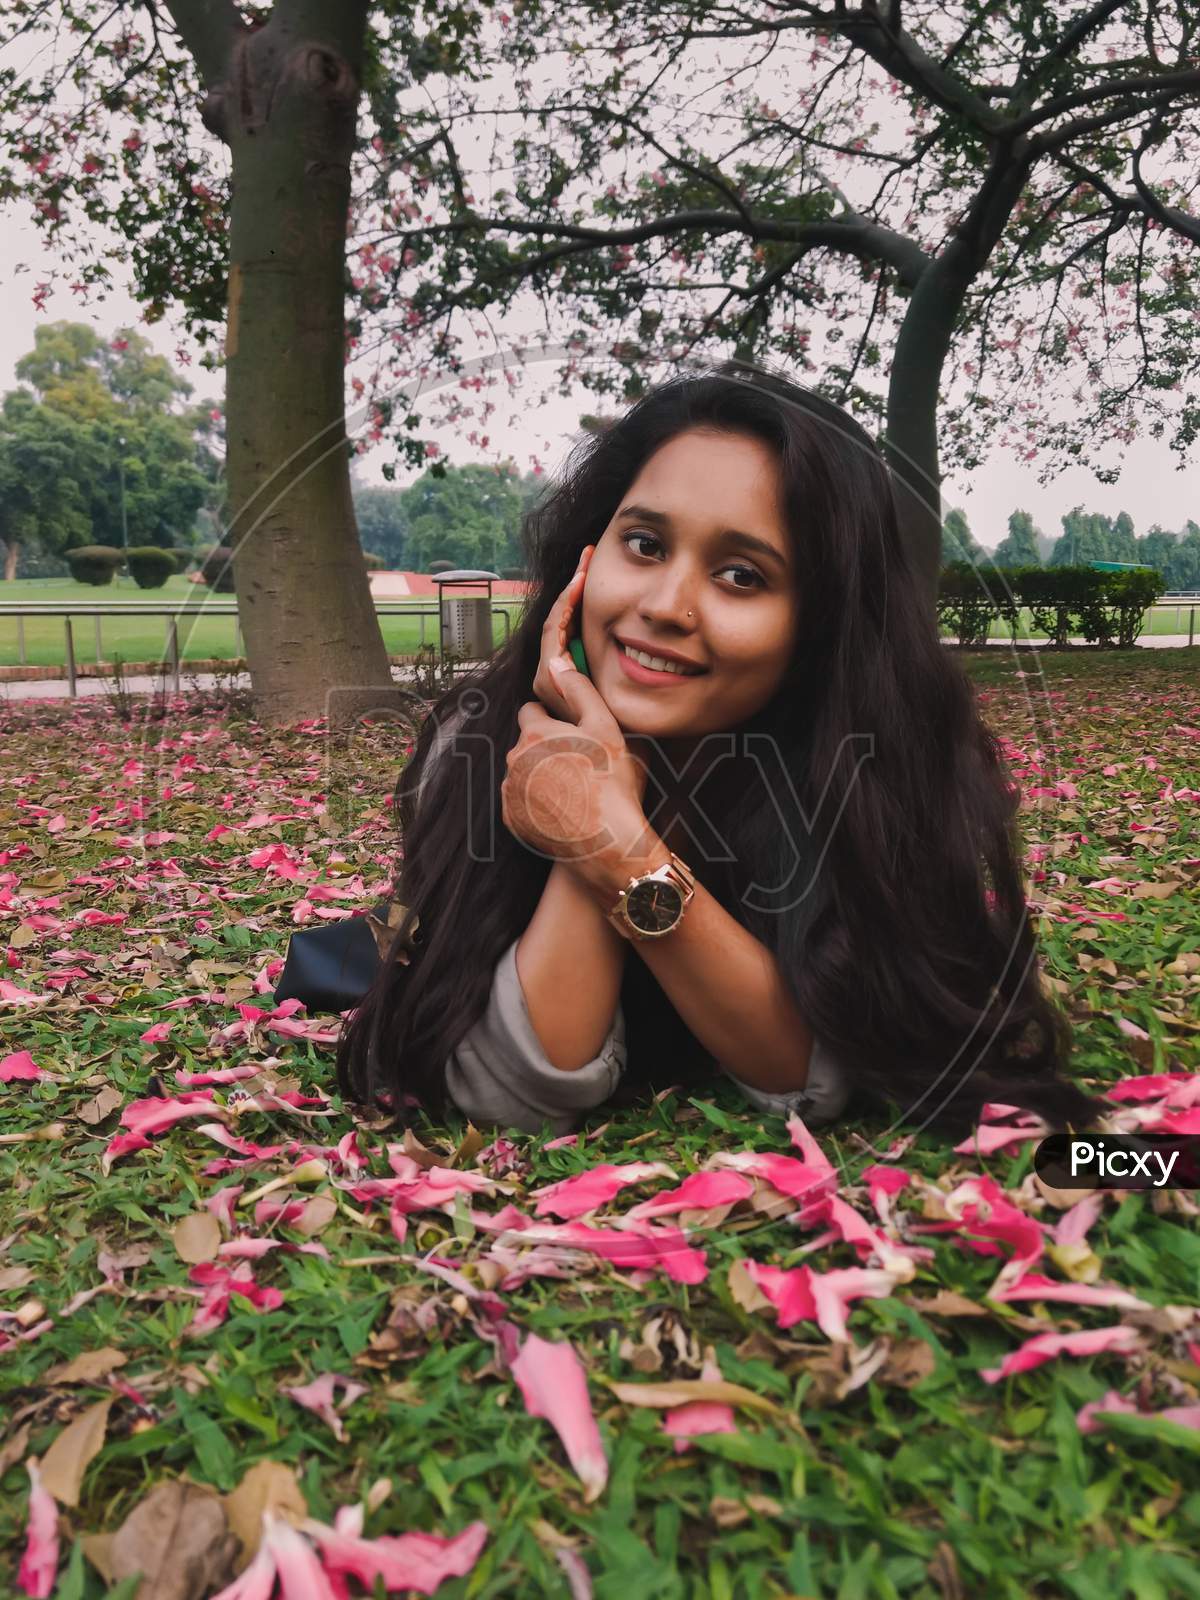 Image Of Portrait Of Beautiful Indian Girl Smiling With Perfect Smile And White Teeth In A Park